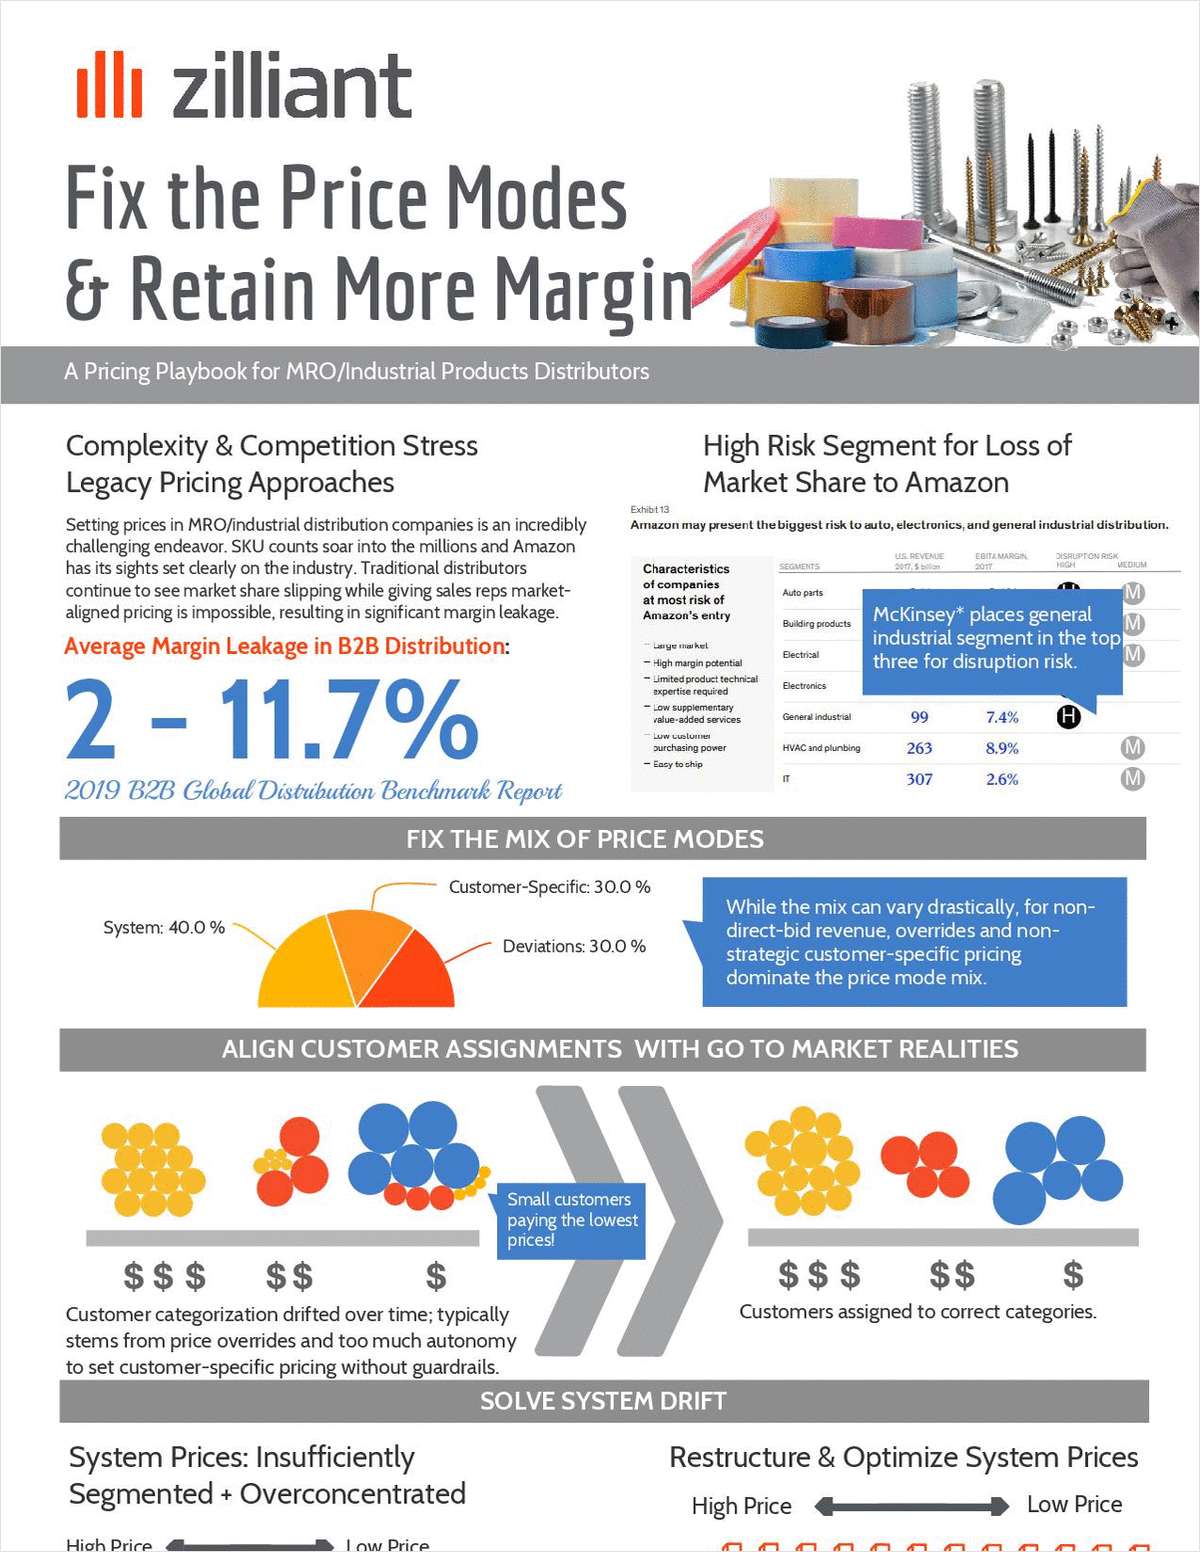 Fix the Price Modes to Retain More Margin in MRO/Industrial Distribution